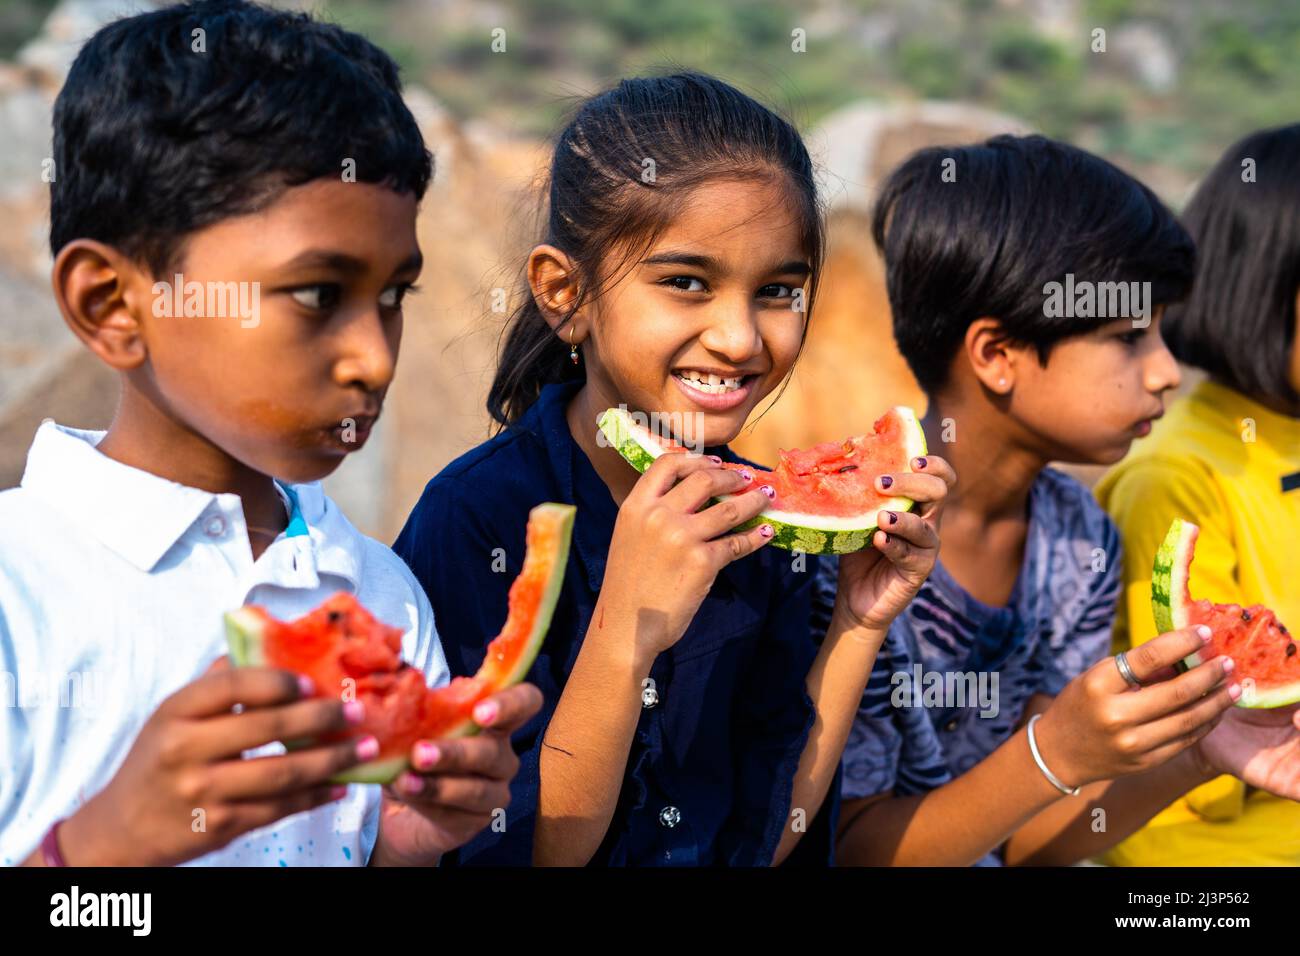 girl kid looking camera while group of kids busy eating watermelon during hot summer day - concept of dehydration, healthy eating and friendship Stock Photo